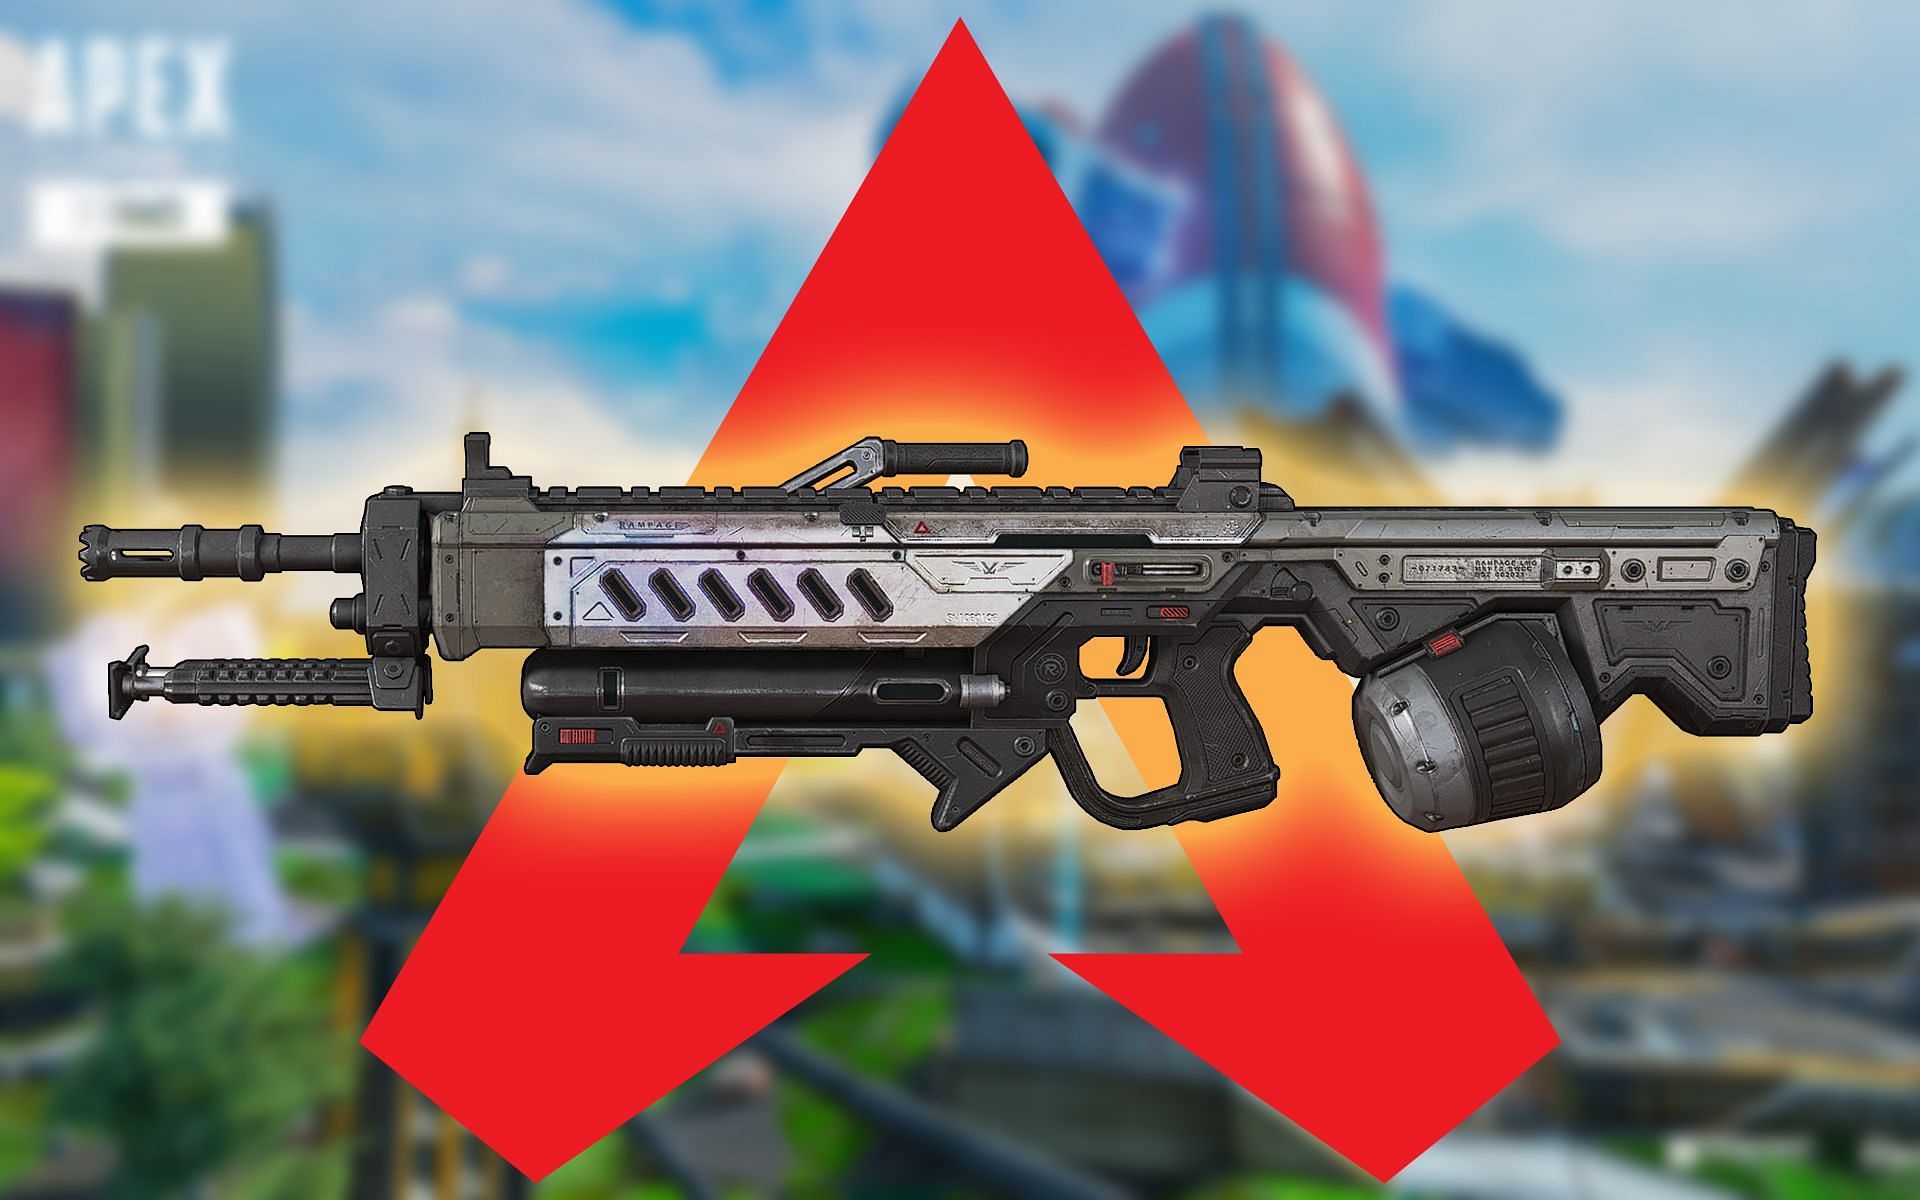 Rampage has replaced the Spitfire LMG as ground loot in Apex Legends (Image via Respawn Entertainment)